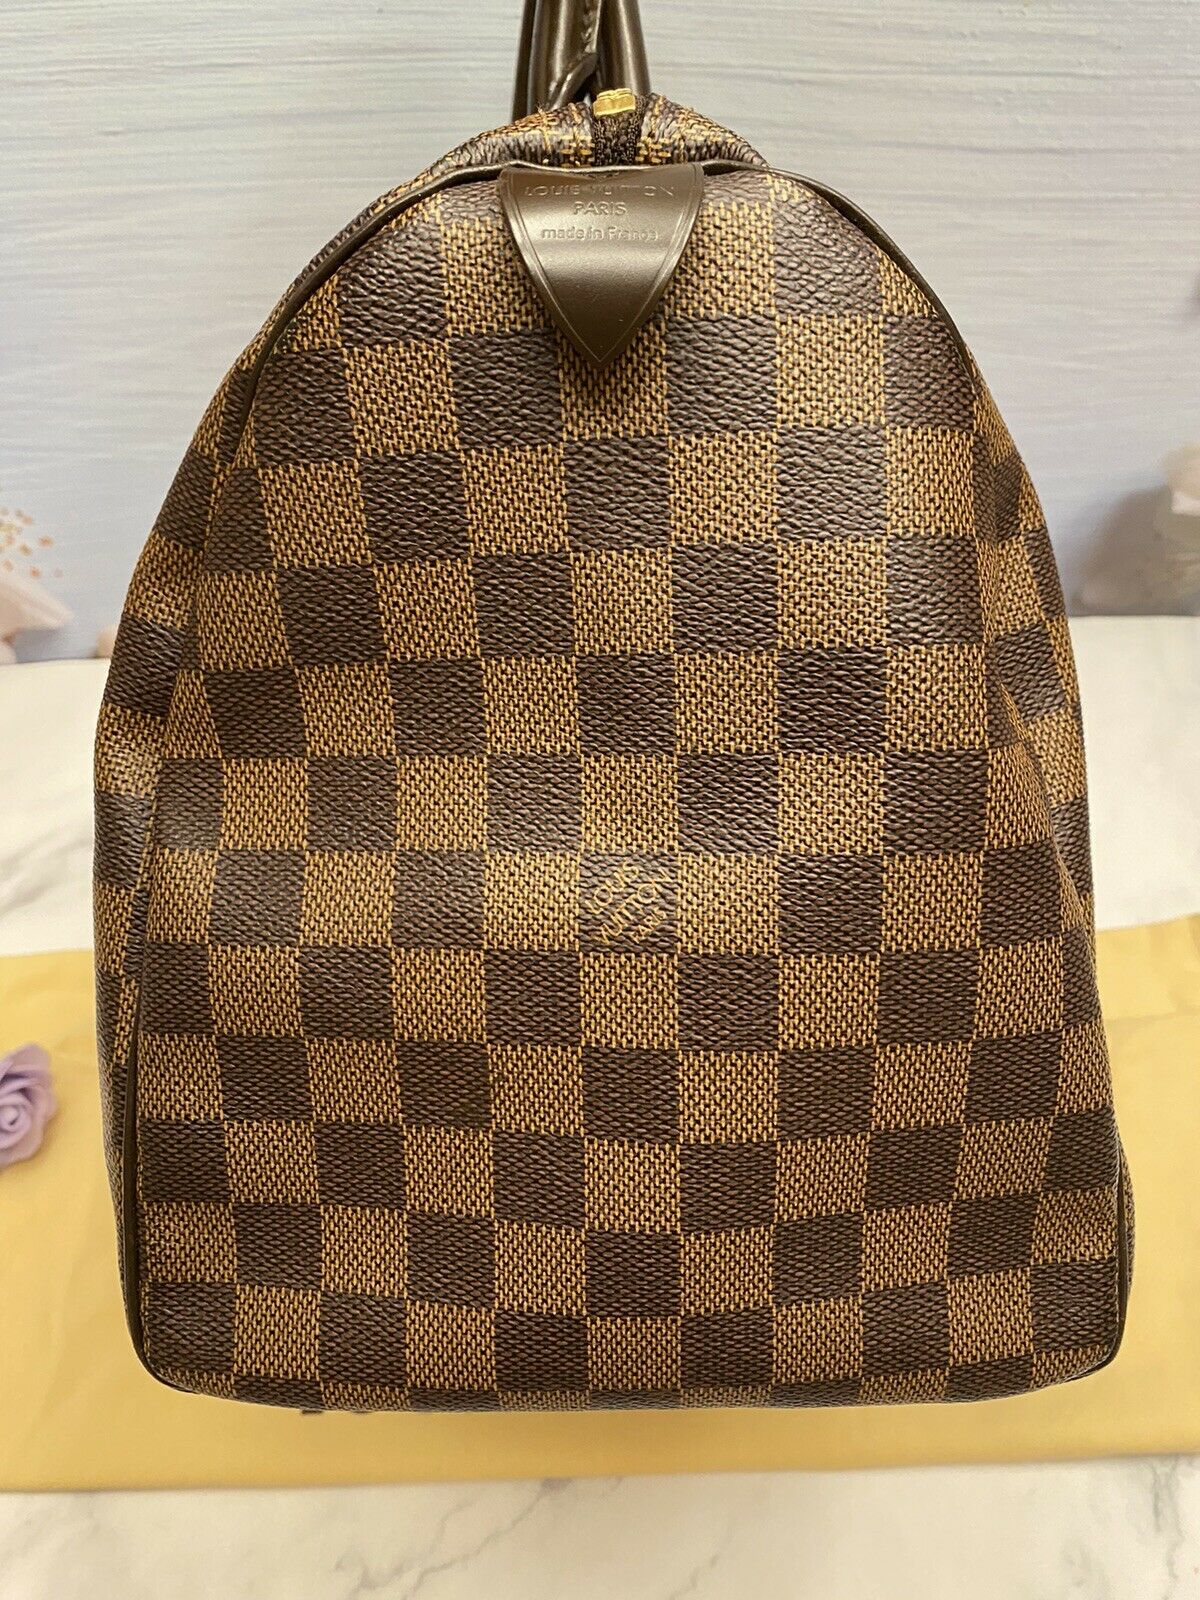 SOLD/LAYAWAY💕 Louis Vuitton Damier Ebene Speedy 30. DC: SP3191. Made in  France. With lock & key ❤️